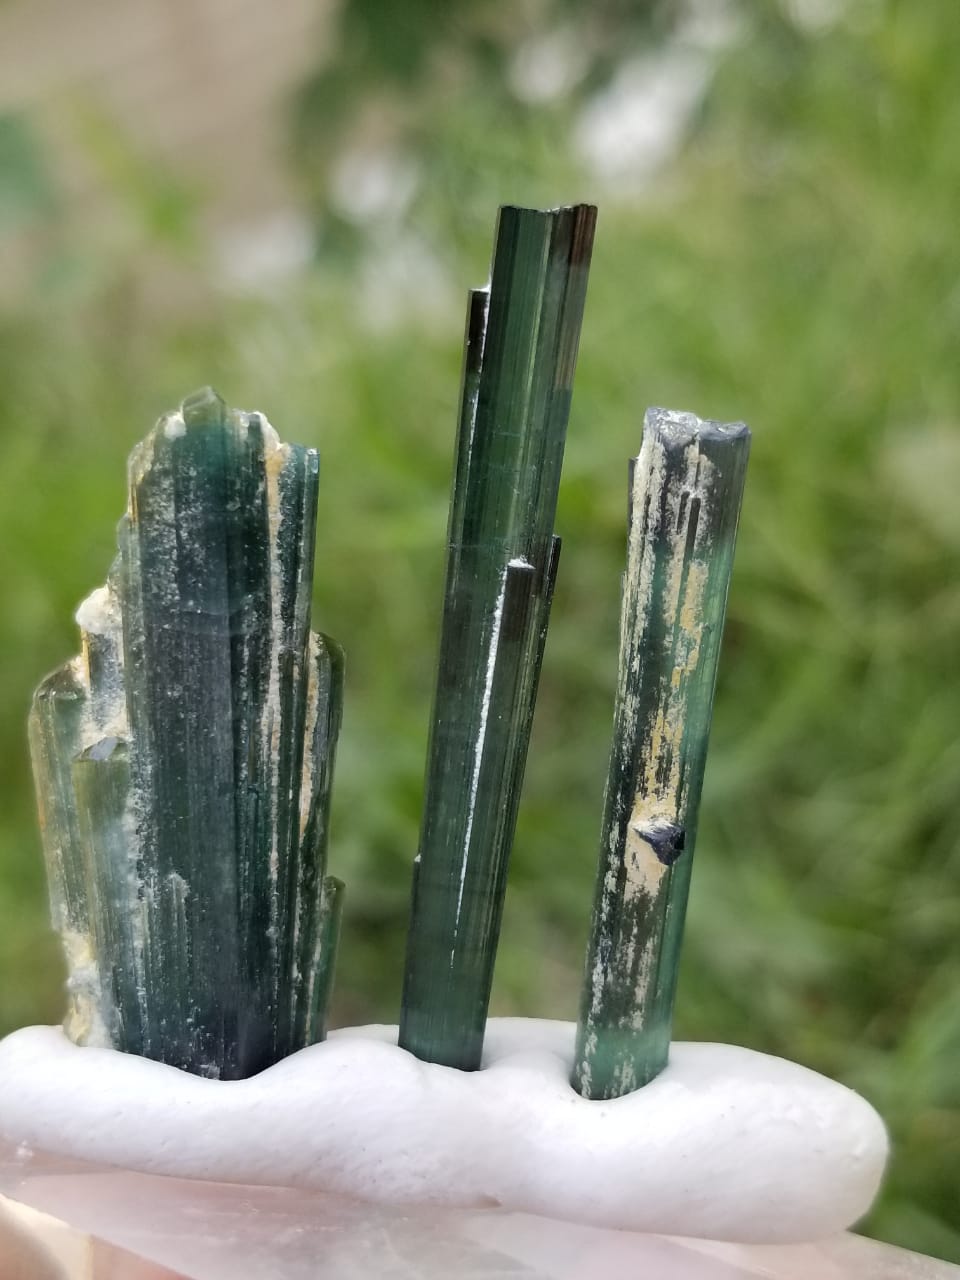 Gorgeous Tourmaline Crystals lot Available for sale